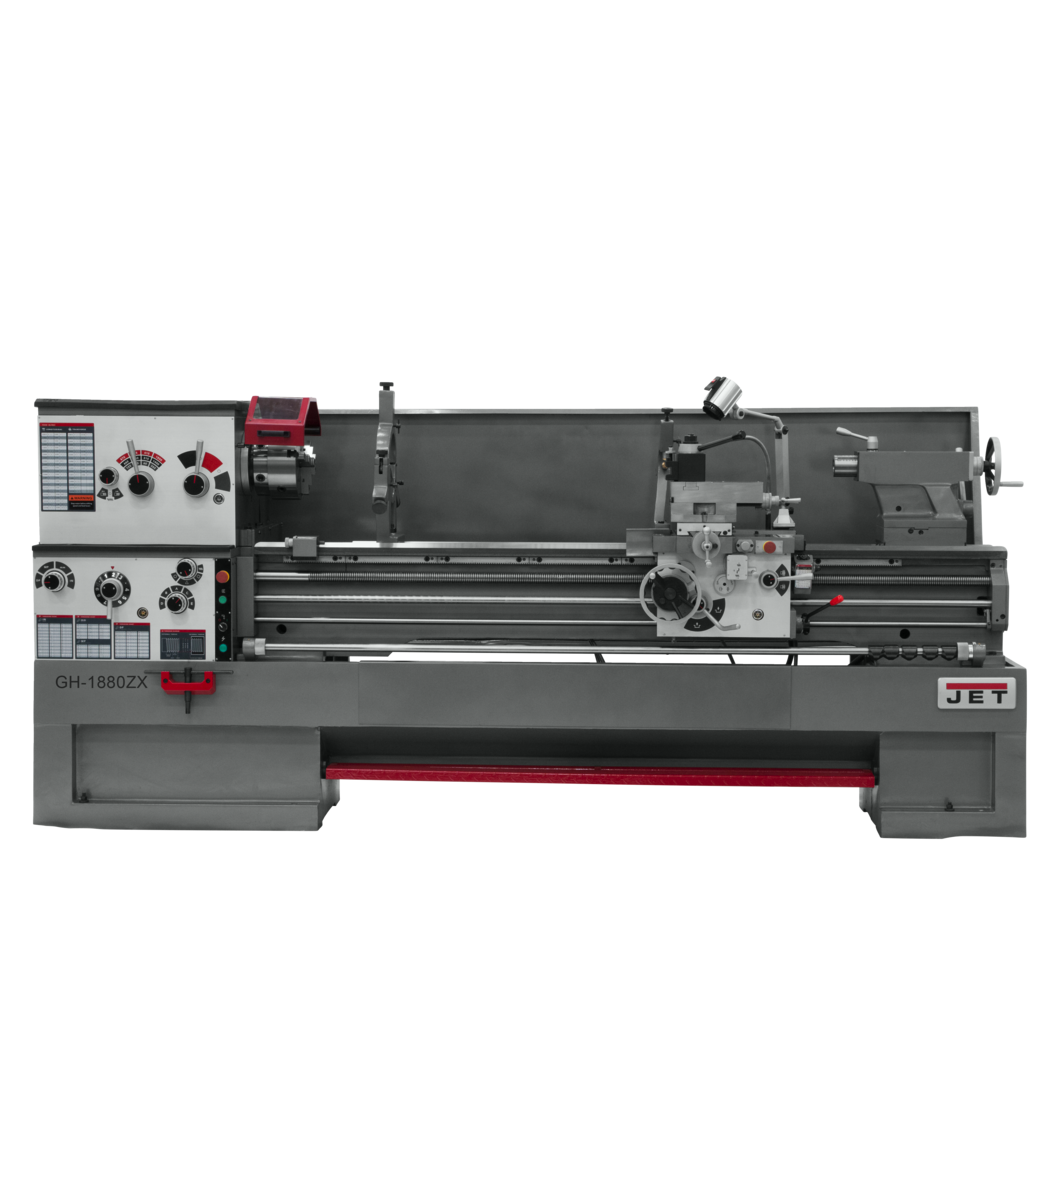 321486, GH-1880ZX-TAK Lathe with Taper Attachment Installed, Jet, Metalworking, Turning, Lathes